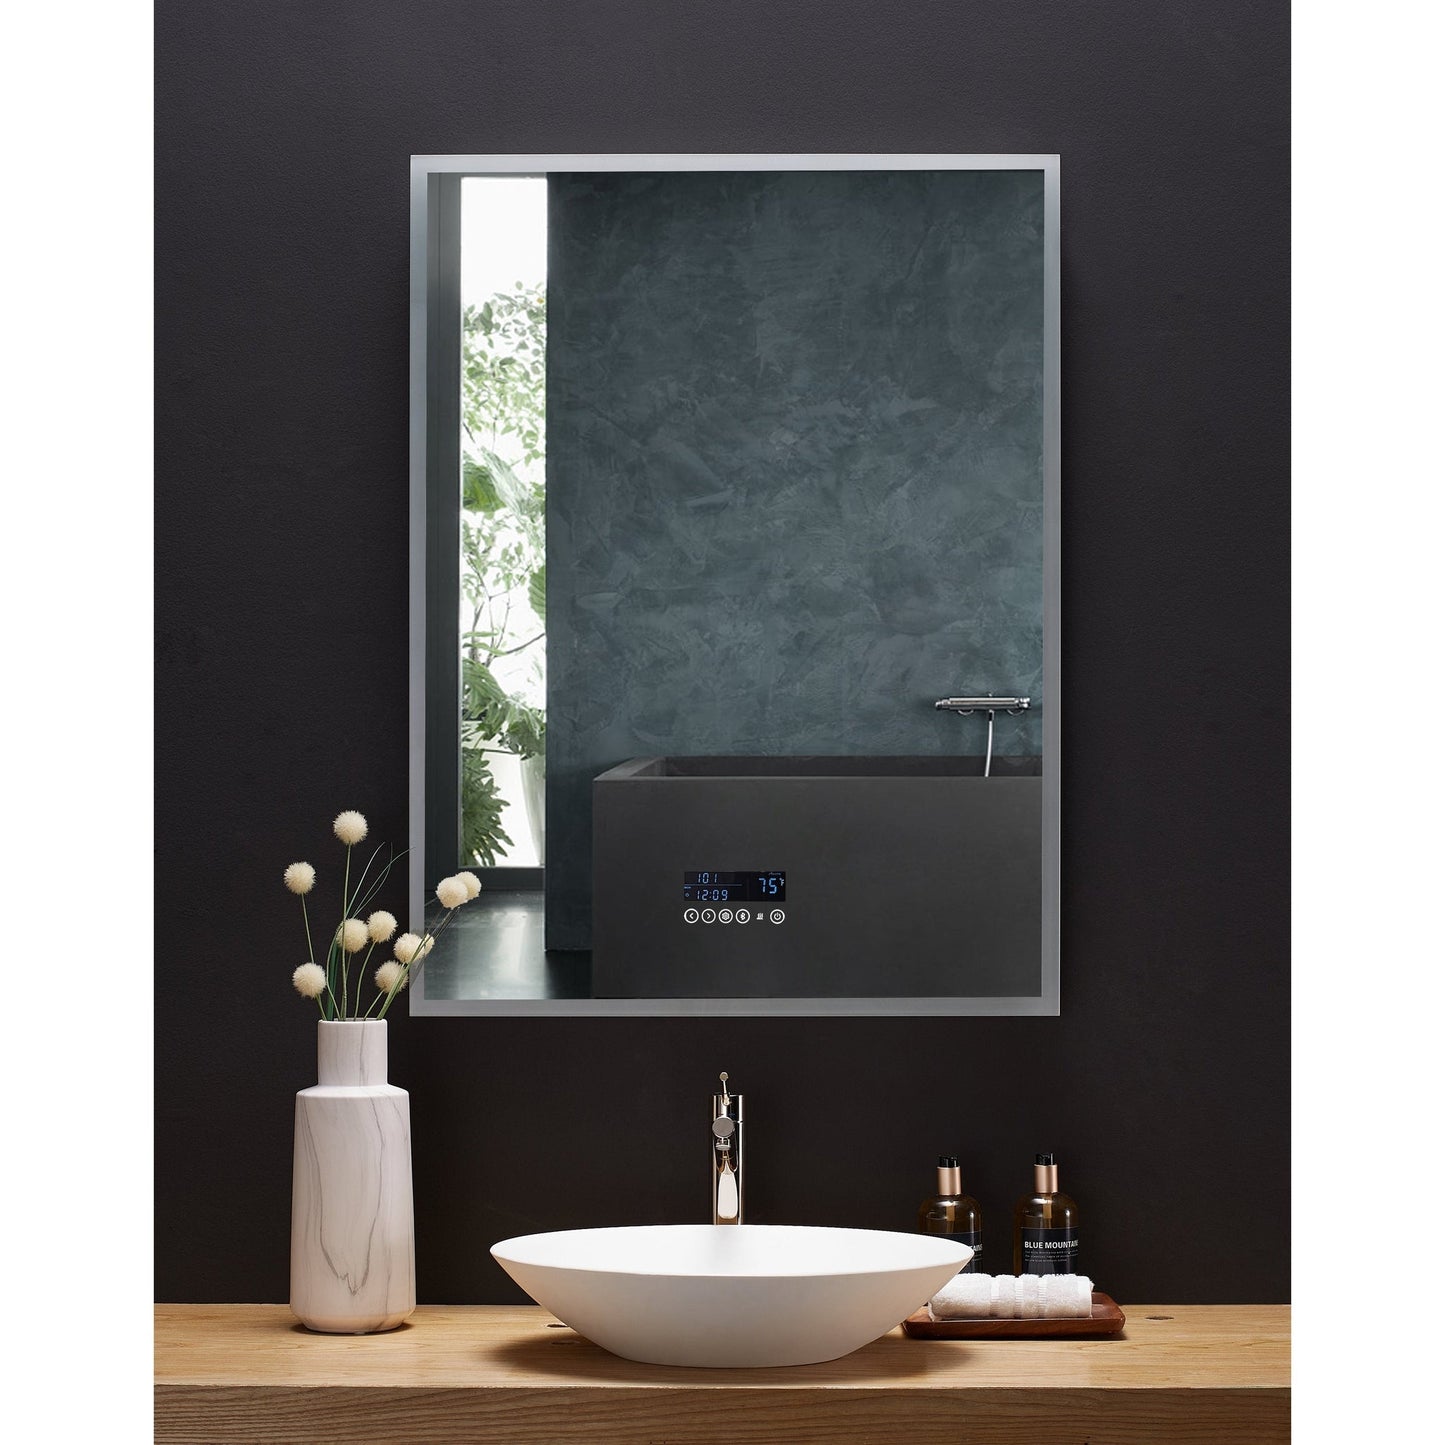 Ancerre Designs Immersion 30" x 40" Modern Rectangle LED Lighted Frameless Bathroom Vanity Mirror With Bluetooth, Defogger, Digital Display and Mounting Hardware